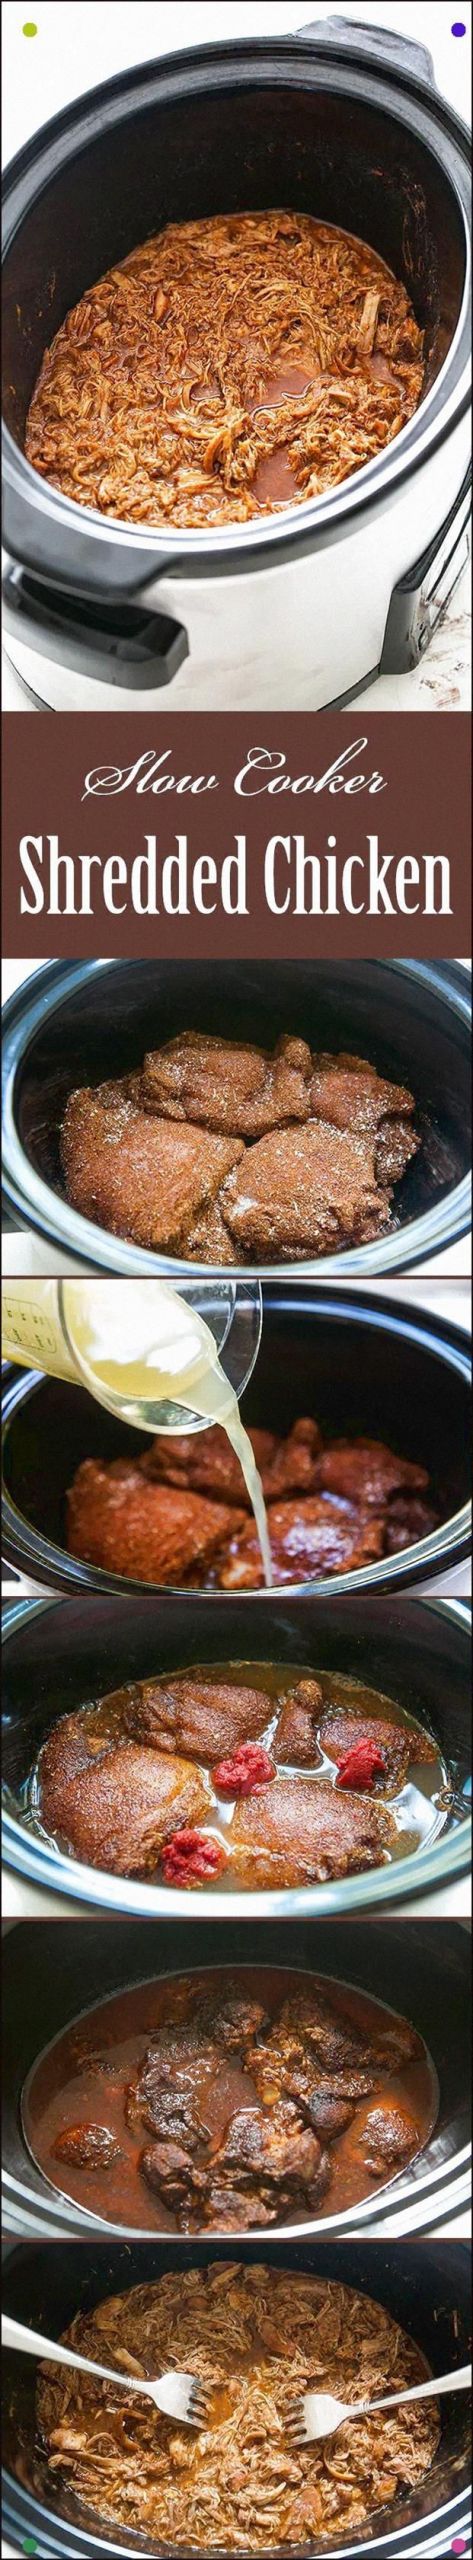 Shredded Chicken Thighs Slow Cooker
 Slow Cooker Shredded Chicken Thighs Perfect Filling For